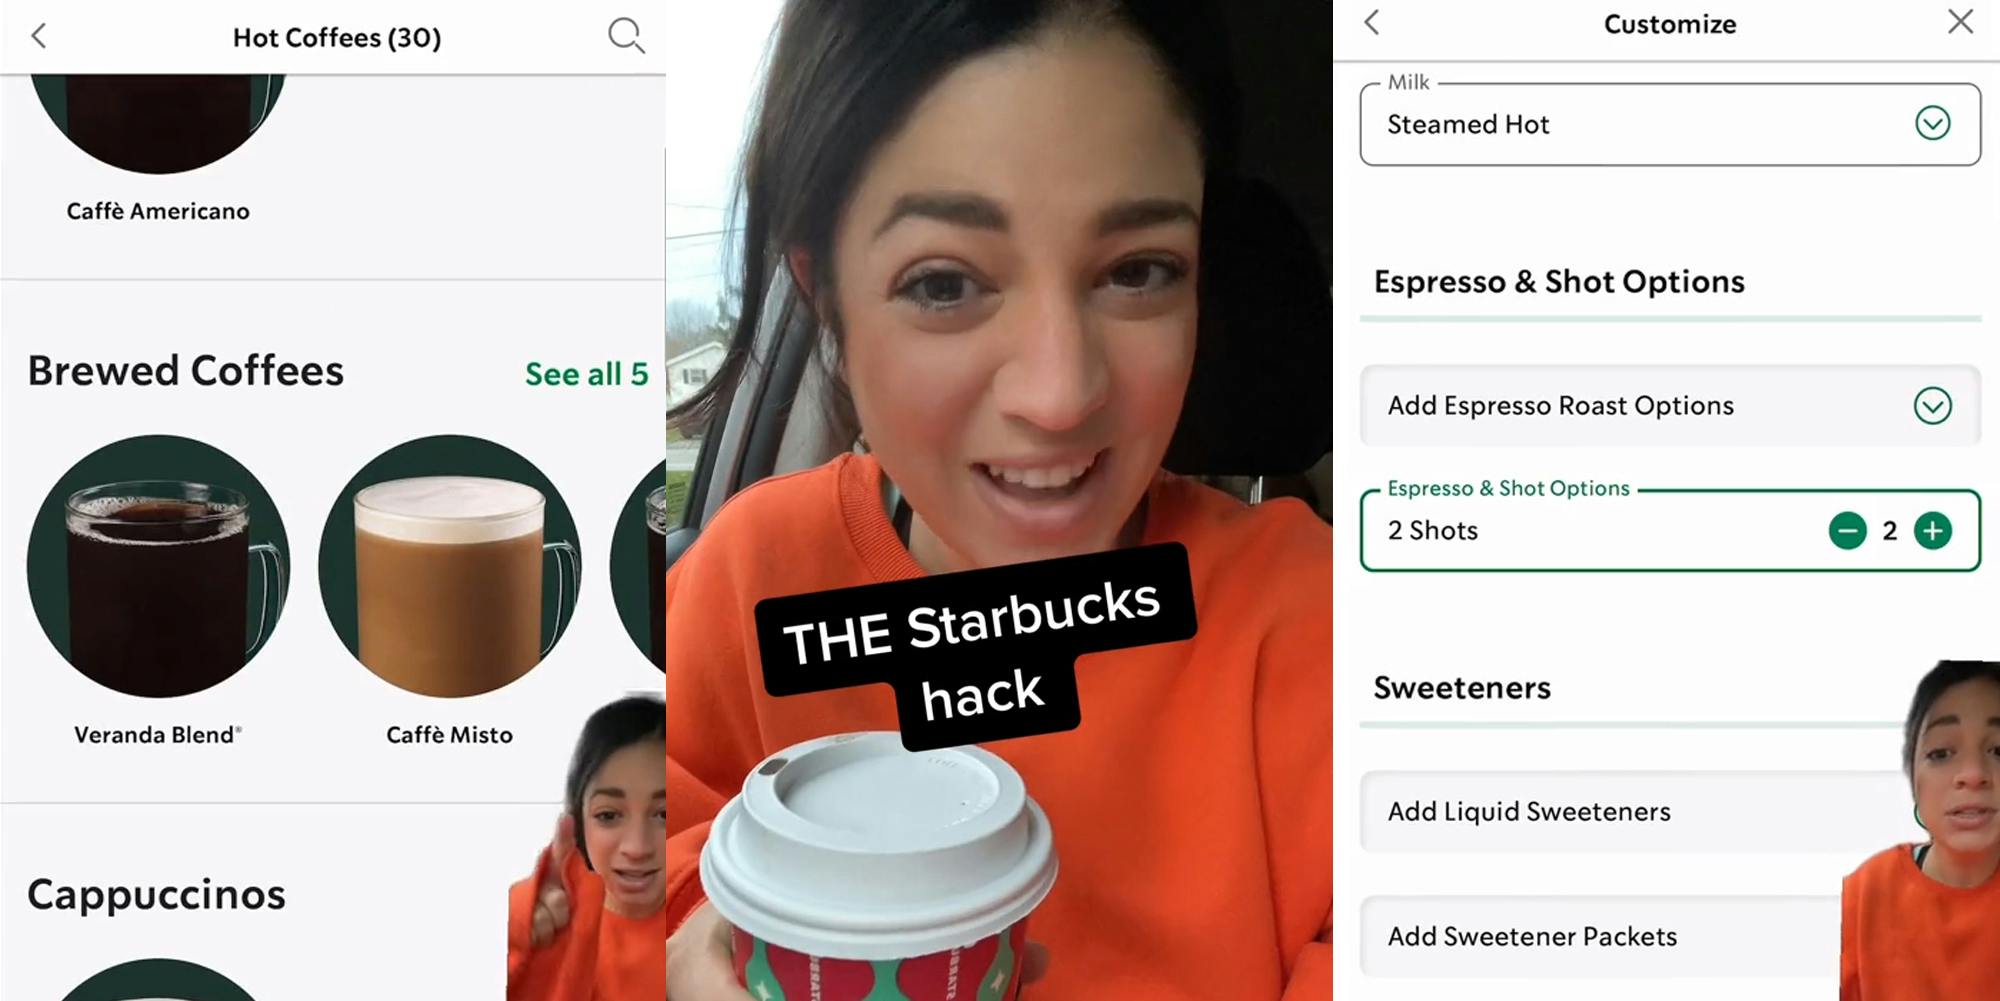 woman greenscreen TikTok over Starbucks app "Hot Coffees" section (l) woman in car with Starbucks coffee caption "THE Starbucks hack" (c) woman greenscreen TikTok over Starbucks app in "Customize" category adding 2 shots of espresso (r)